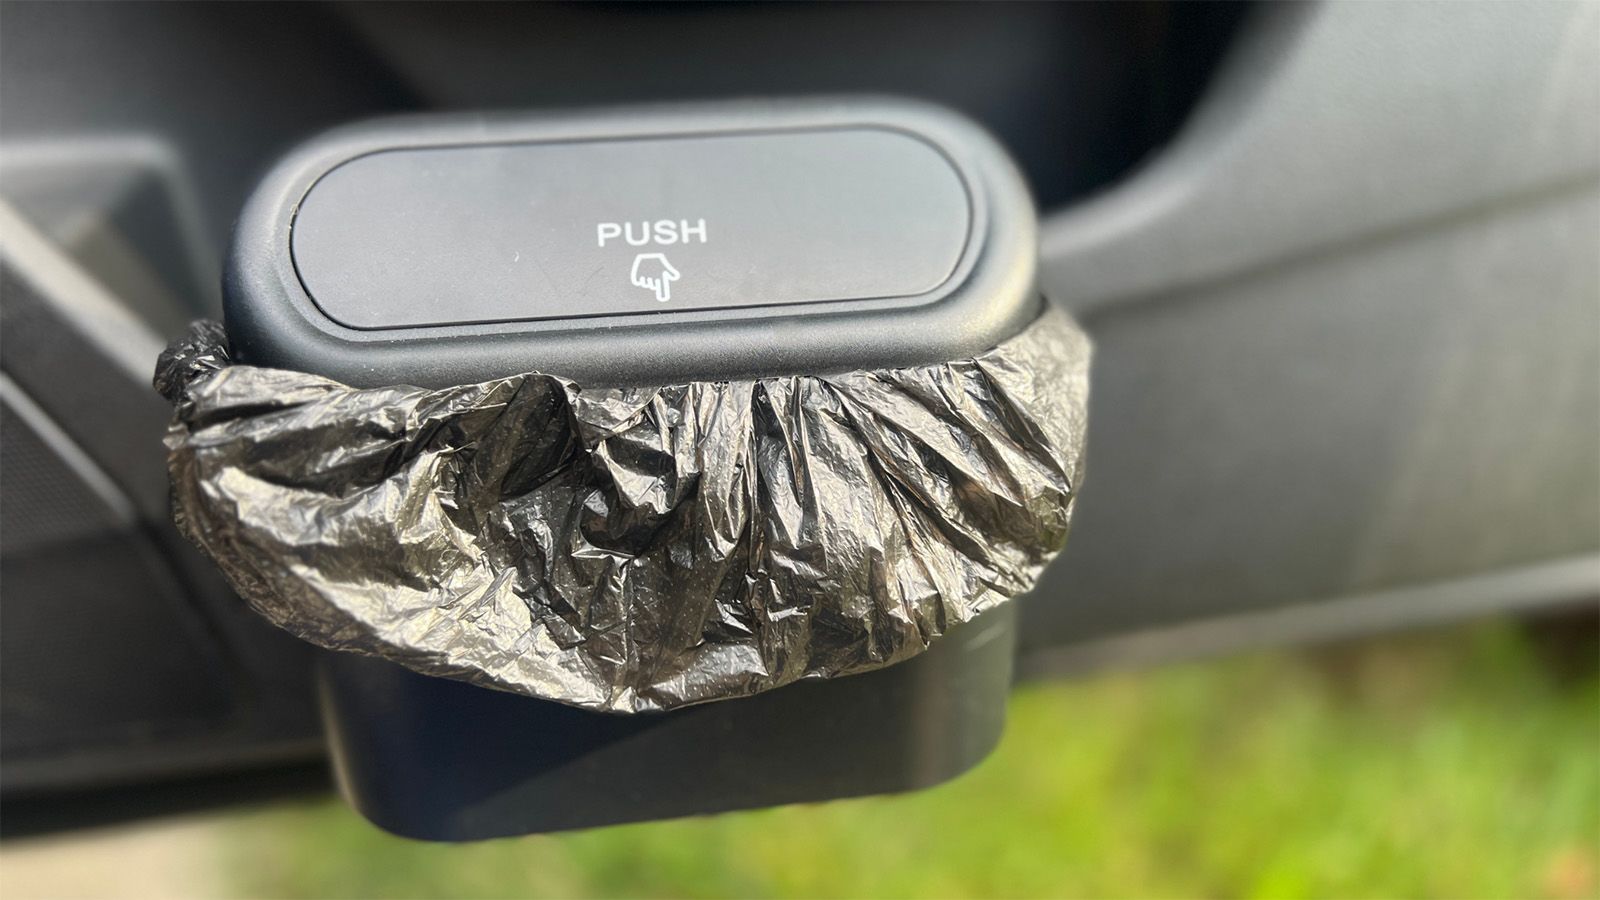 Accmor car trash can review